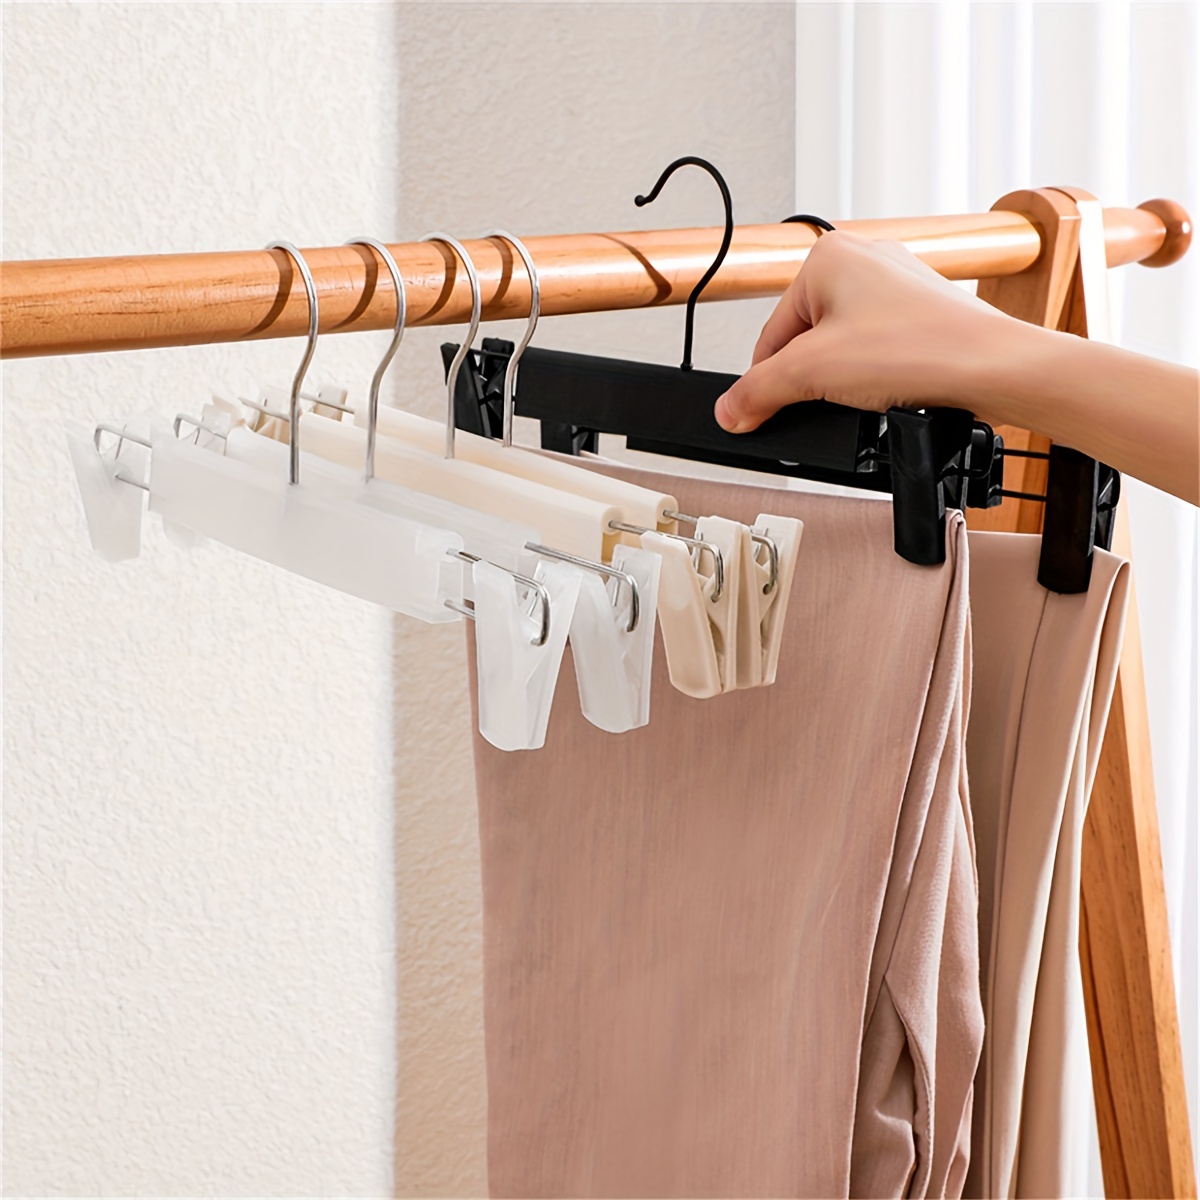 

5pcs Non-slip Strong Pants Clip, Household Plastic Frosted Pants Rack Hanging Pants Clip, Clothing Store Multi-functional Traceless Hanger Hanging Pants Skirt Storage Rack